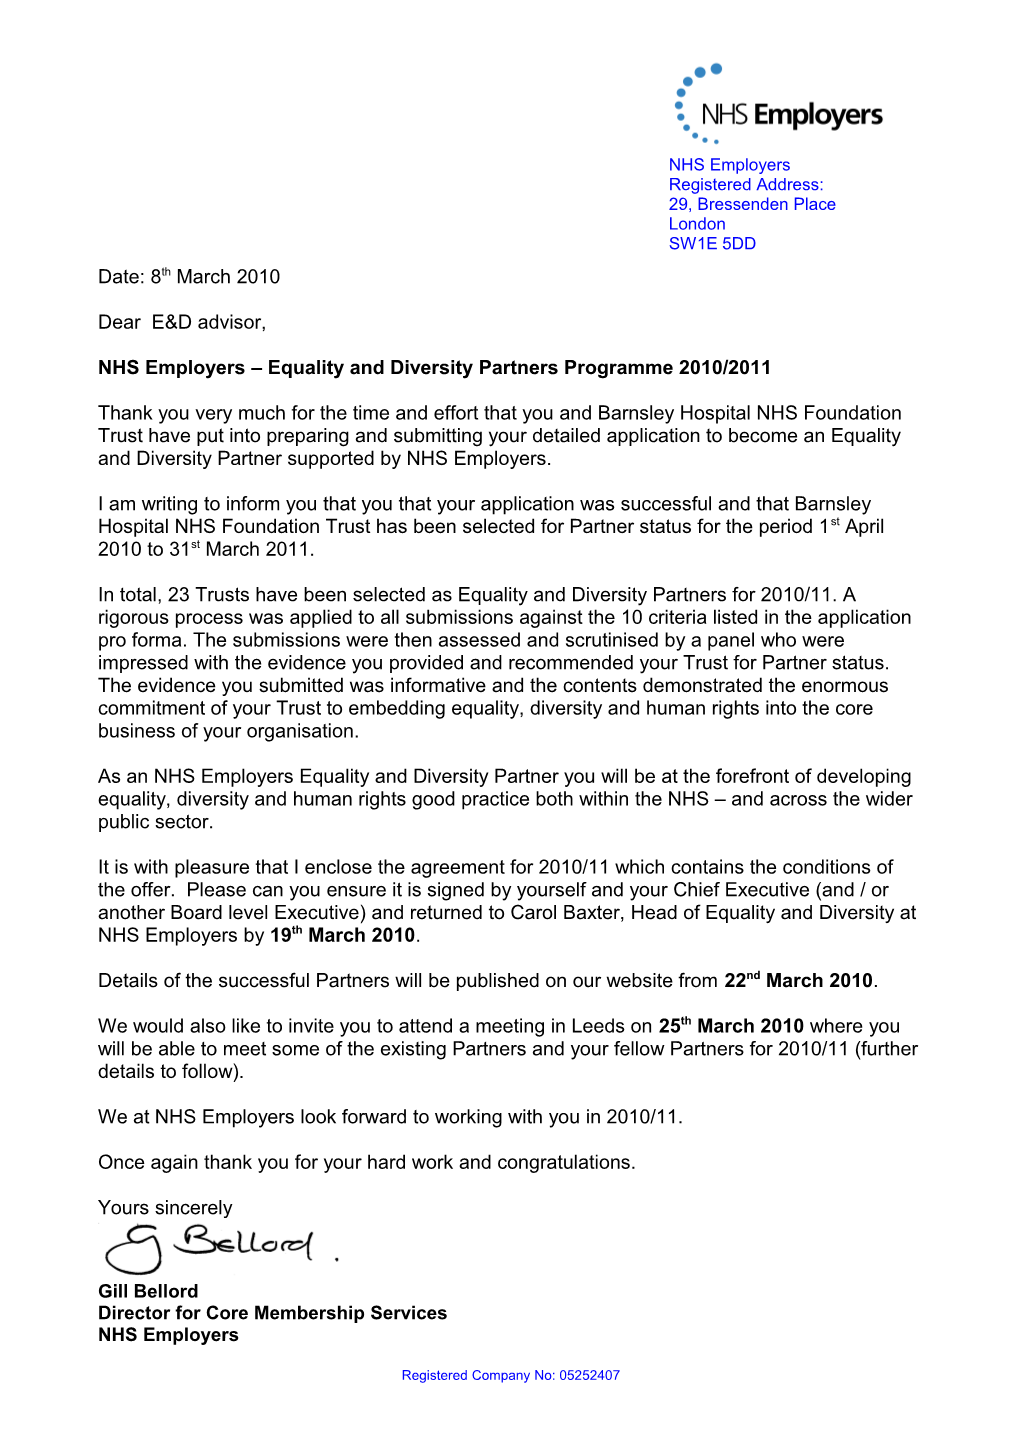 NHS Employers Equality and Diversity Partnersprogramme 2010/2011